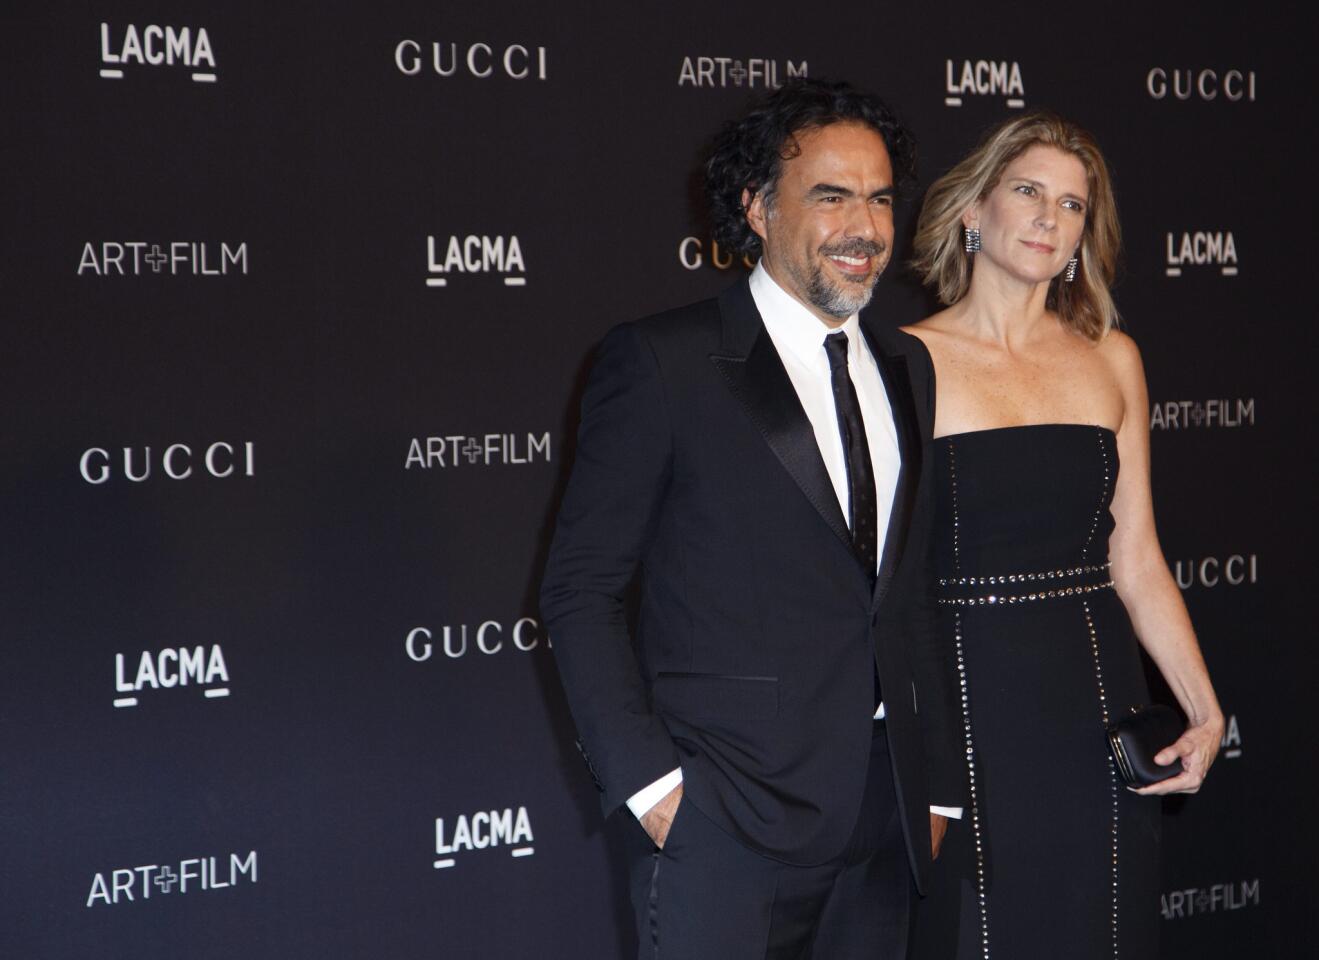 Mexican film director and LACMA honoree Alejandro Gonzalez Inarritu and his wife, Maria Eladia Hagerman, arrive for the Los Angeles County Museum of Art (LACMA) Art+Film Gala in Los Angeles.